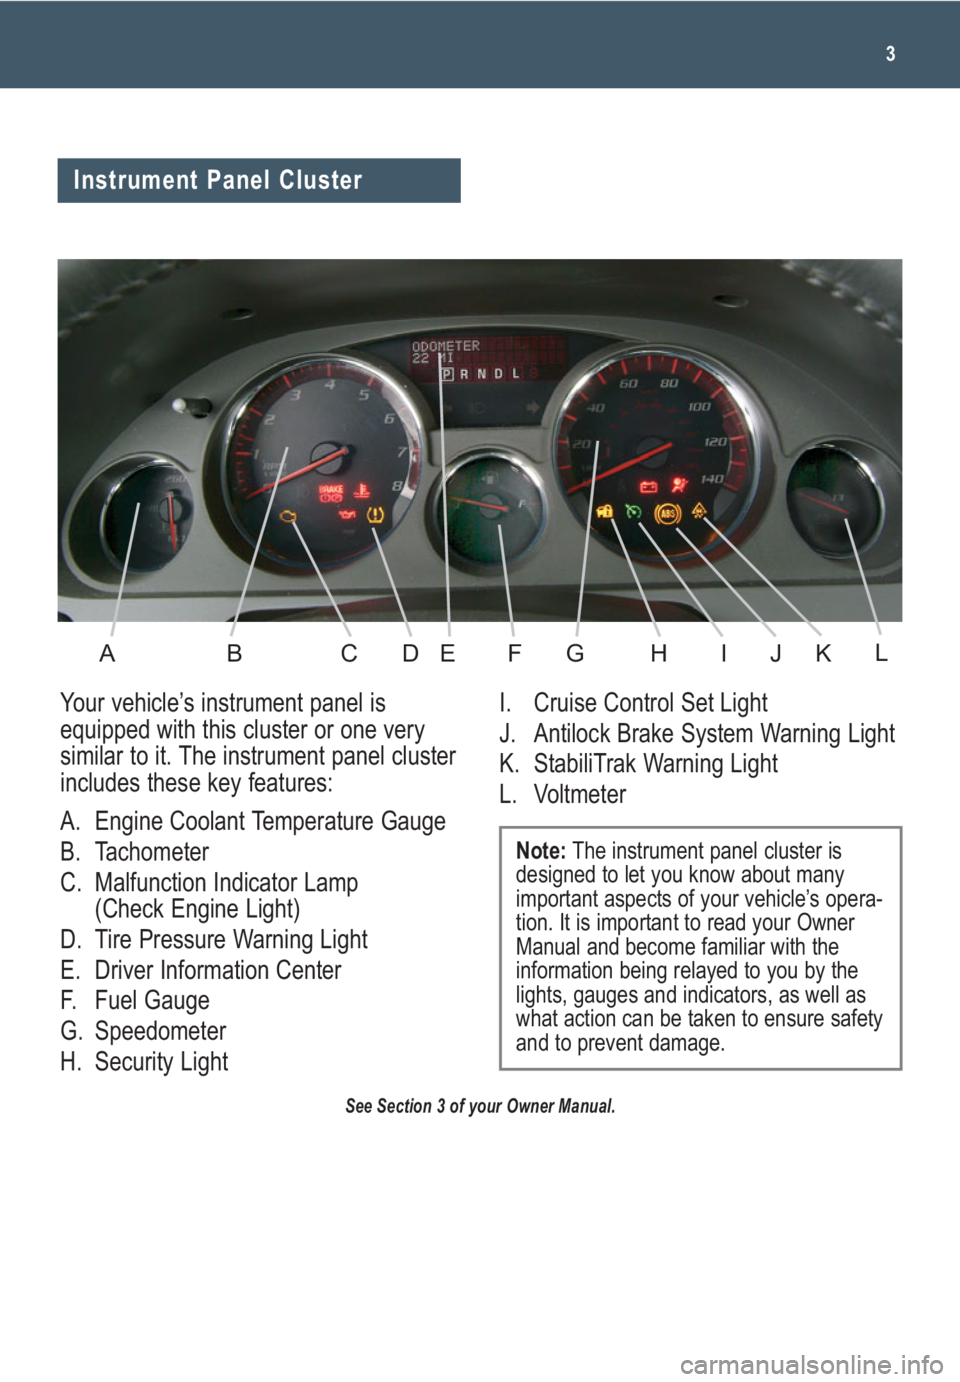 GMC ACADIA 2009  Get To Know Guide 3
See Section 3 of your Owner Manual.
Your vehicle’s instrument panel is
equipped with this cluster or one very
similar to it. The instrument panel cluster
includes these key features:
A. Engine Coo